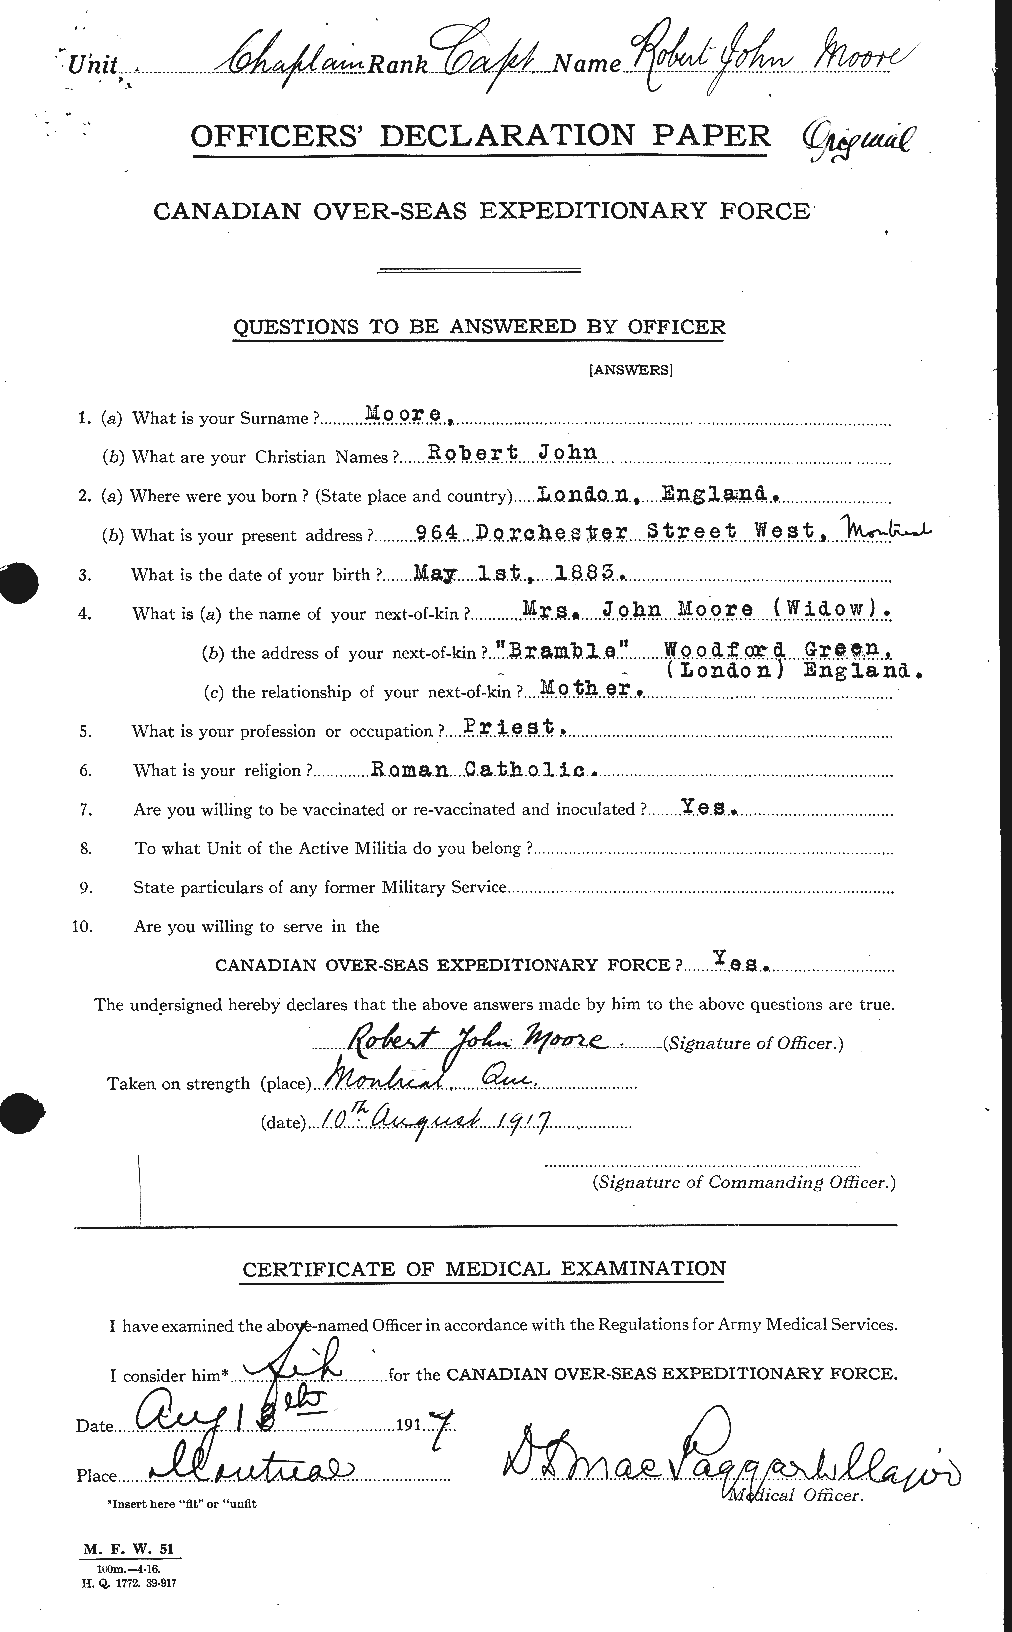 Personnel Records of the First World War - CEF 503578a